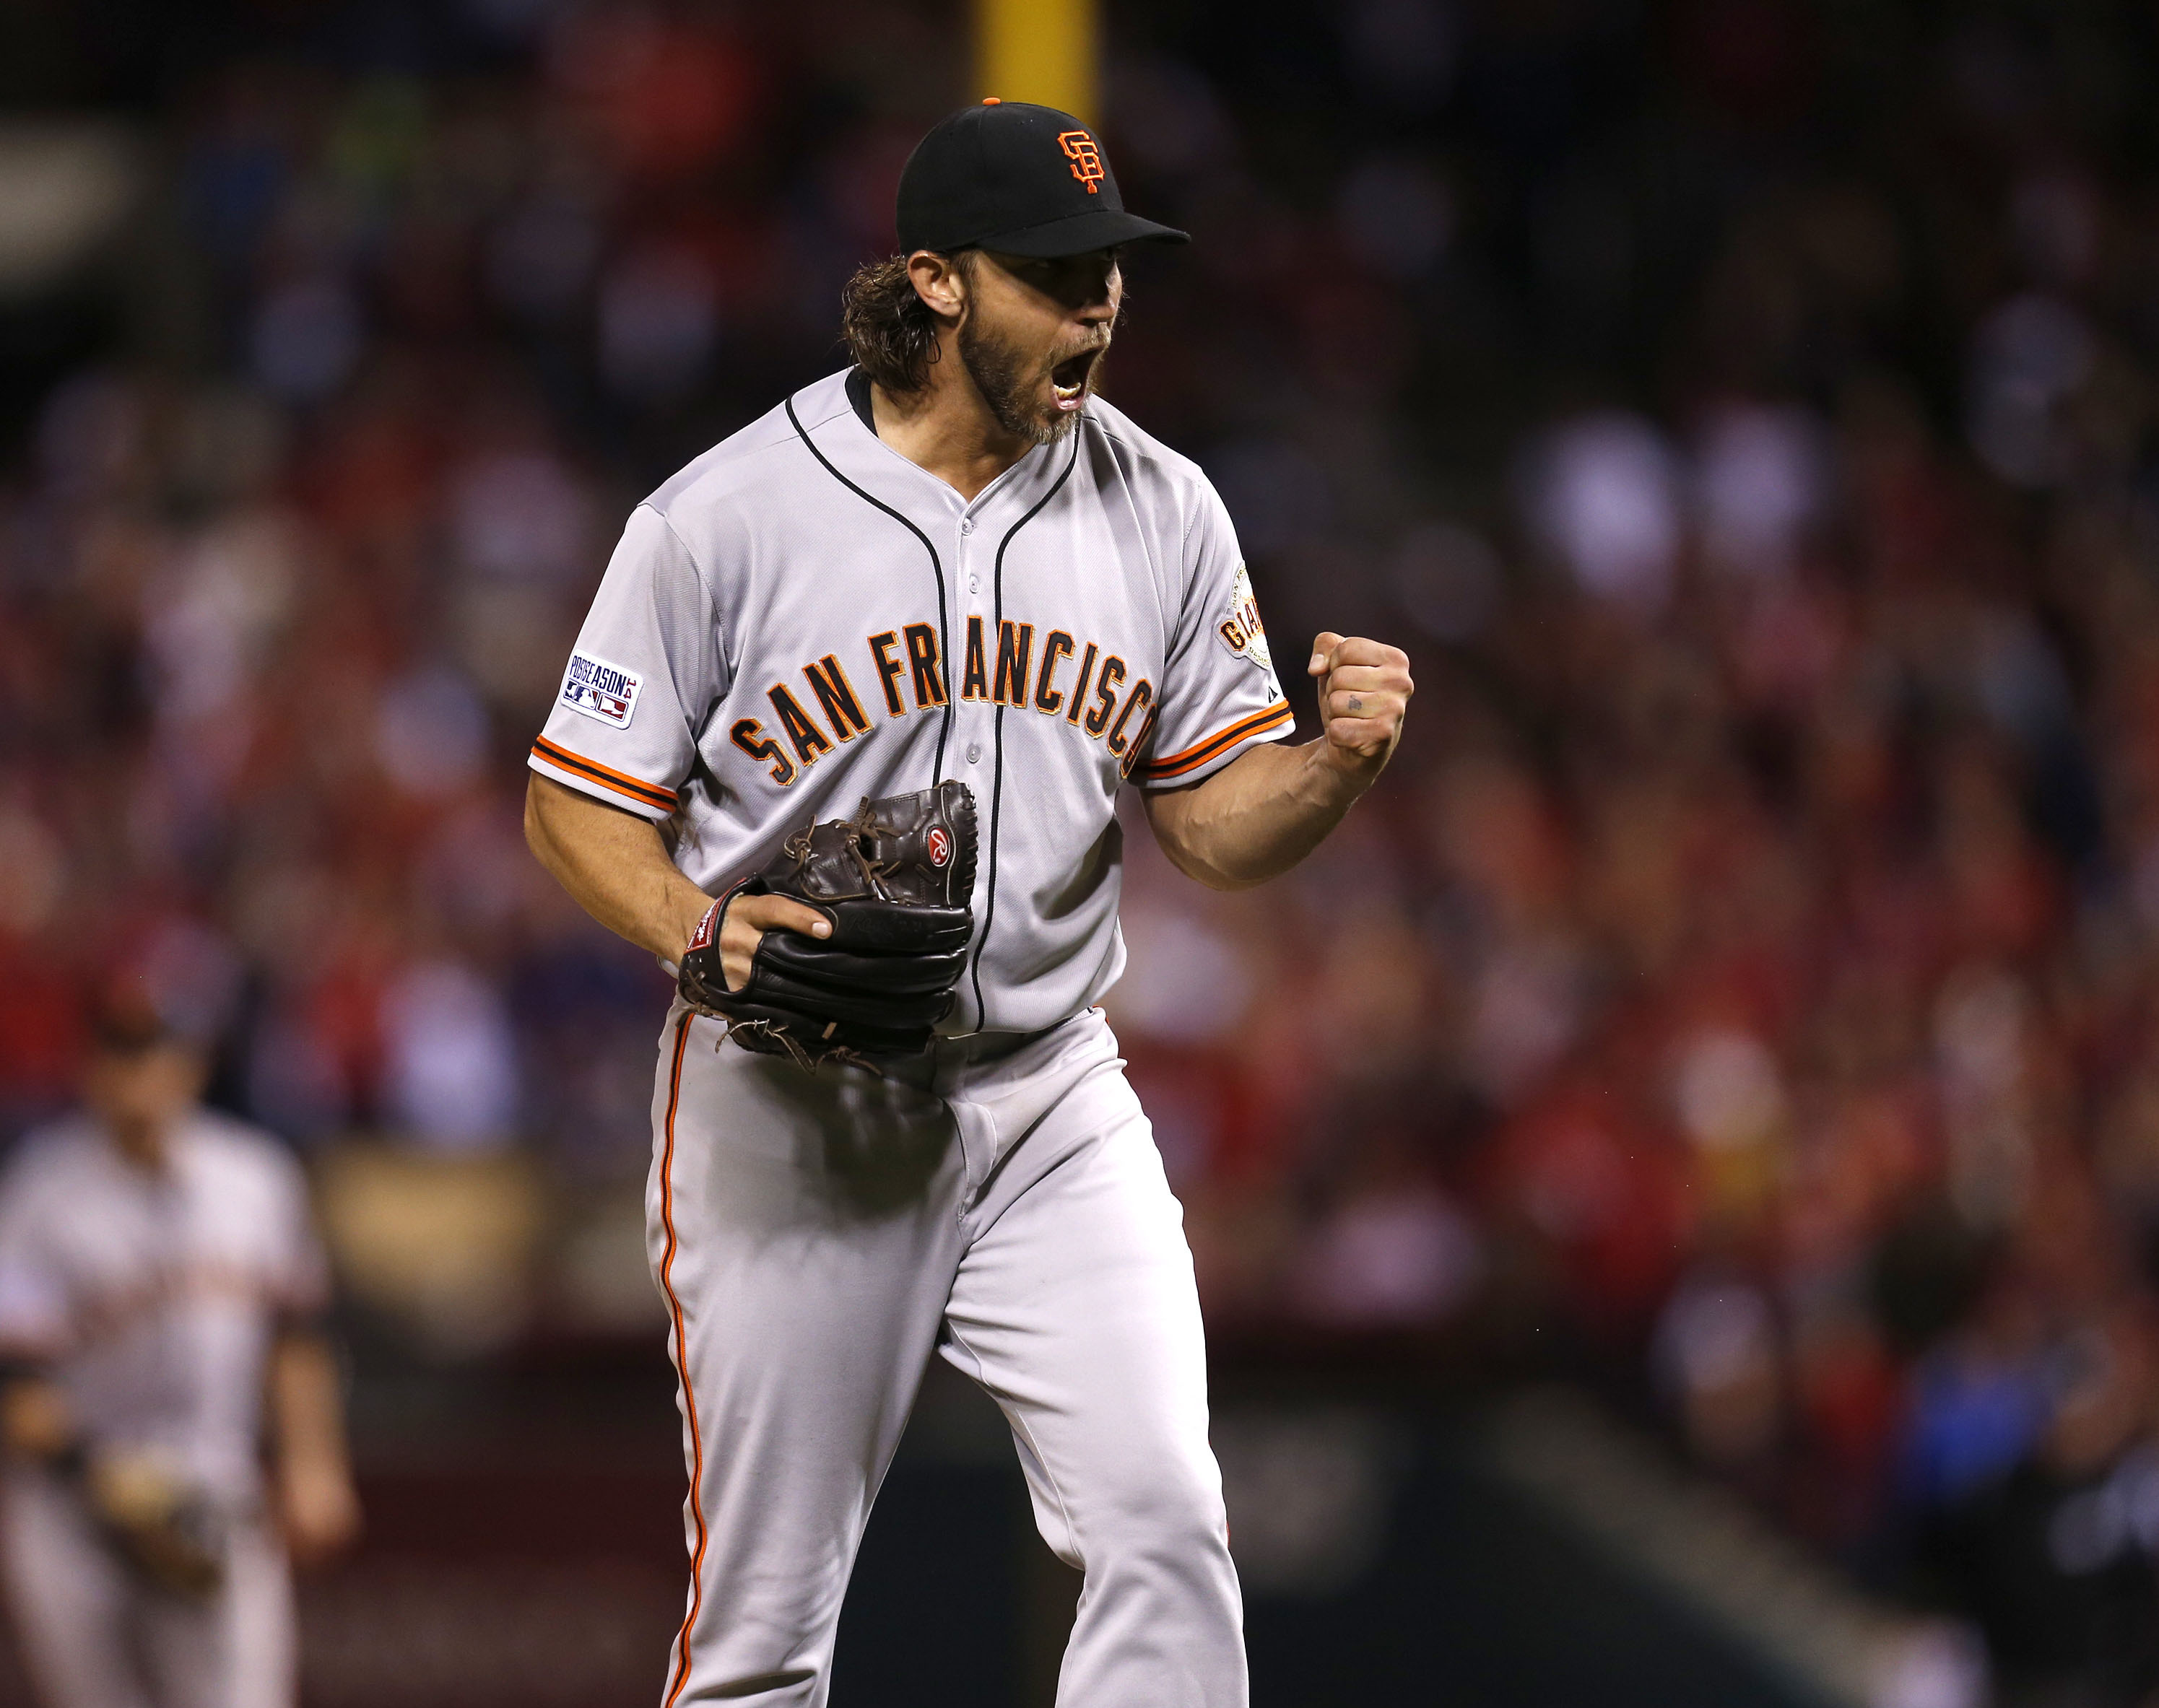 Reigning NLCS MVP Madison Bumgarner is aiming for his third World Series ti...